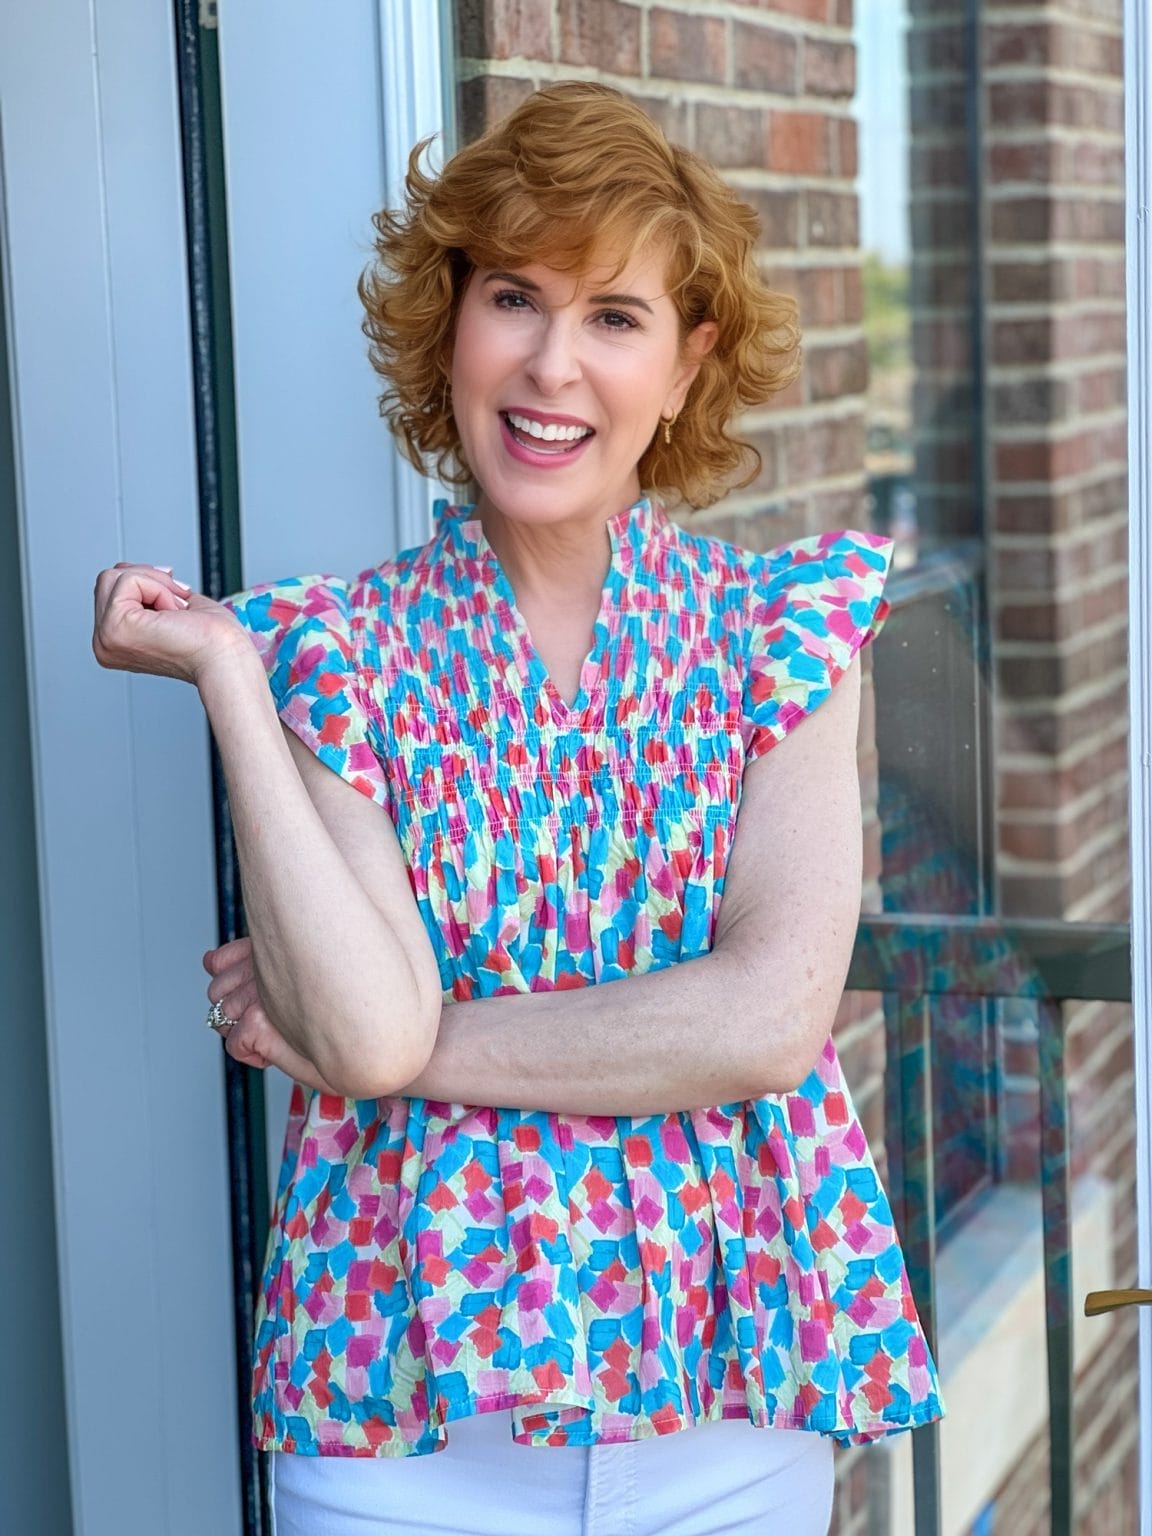 woman over 50 standing outside on a balcony wearing a brightly colored shirt